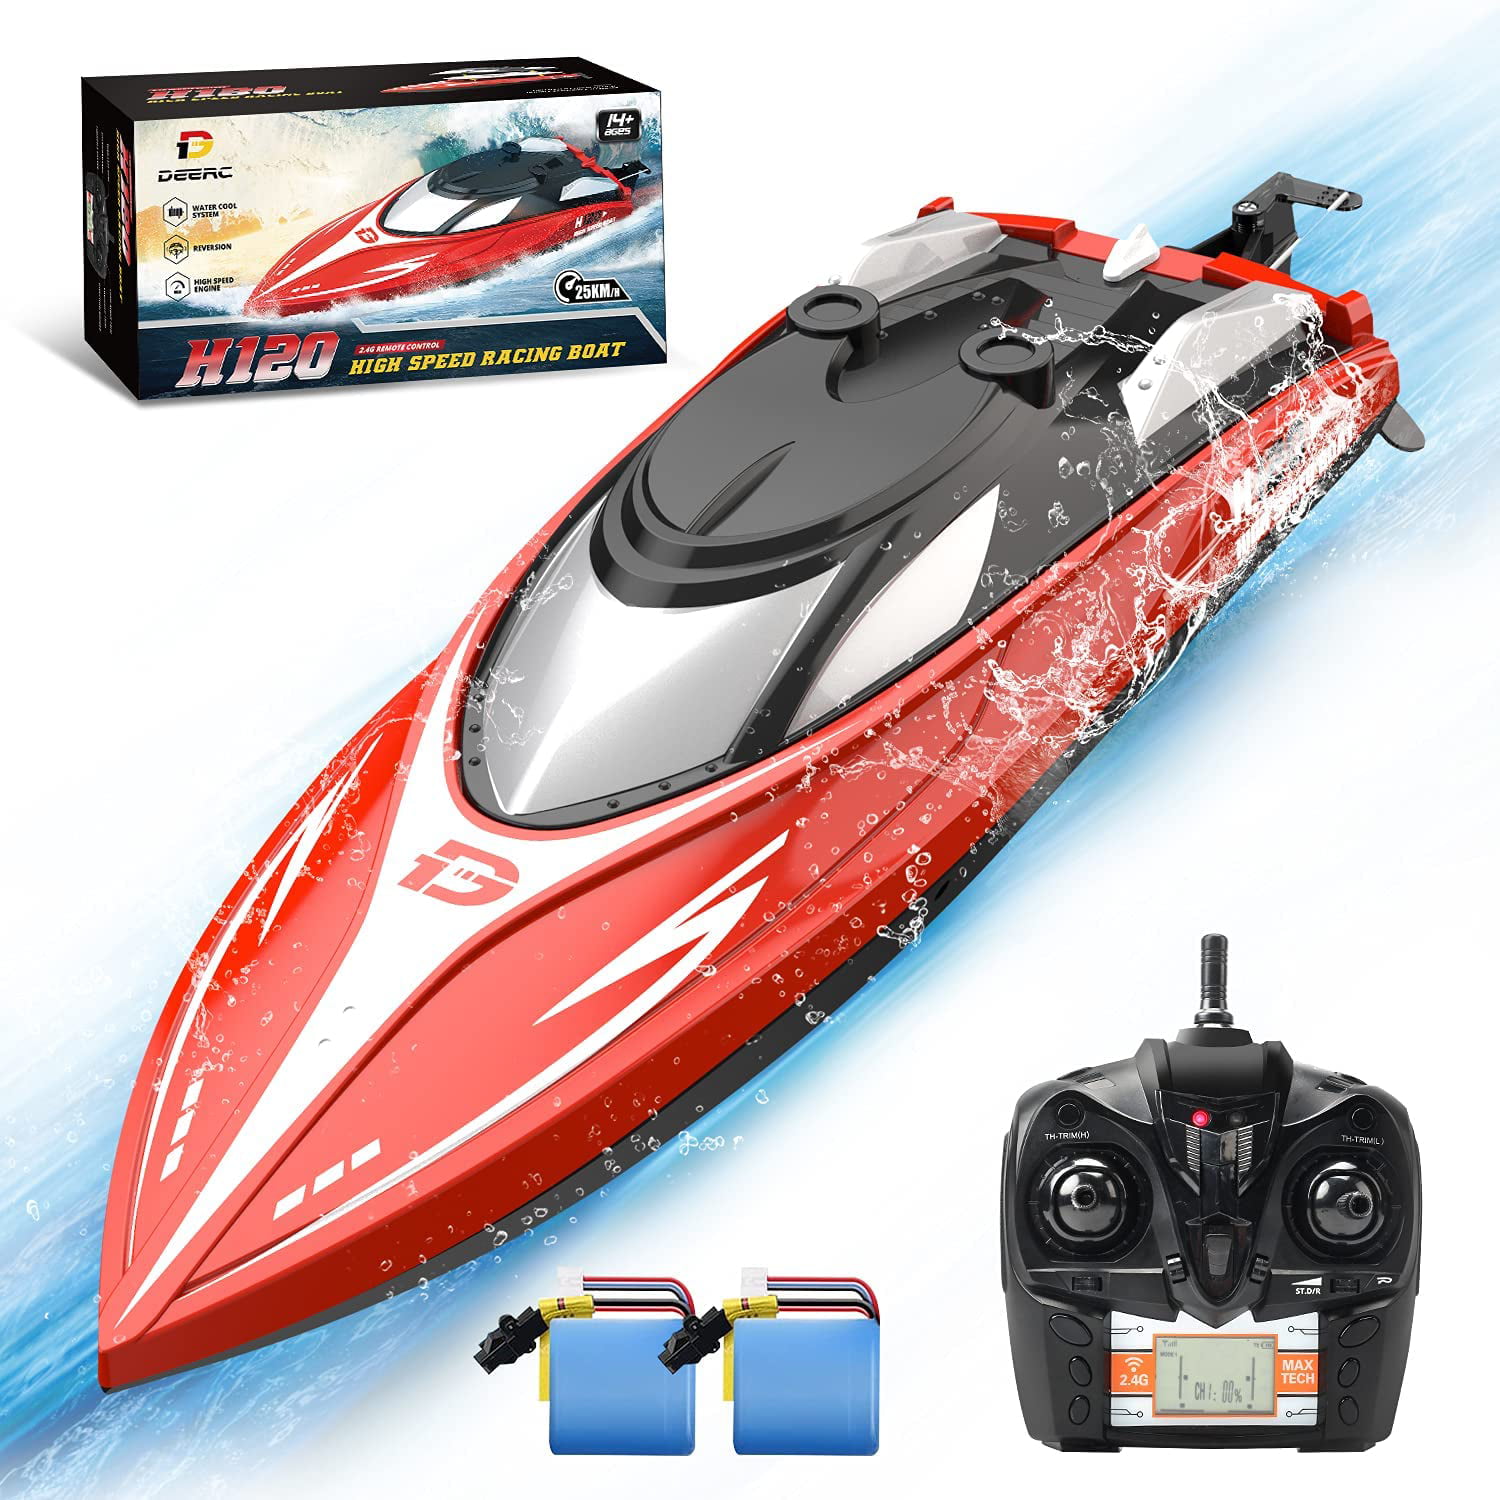 2011-15B Infrared Control 4CH Electric Racing RC Boat High Speed Remote Control 